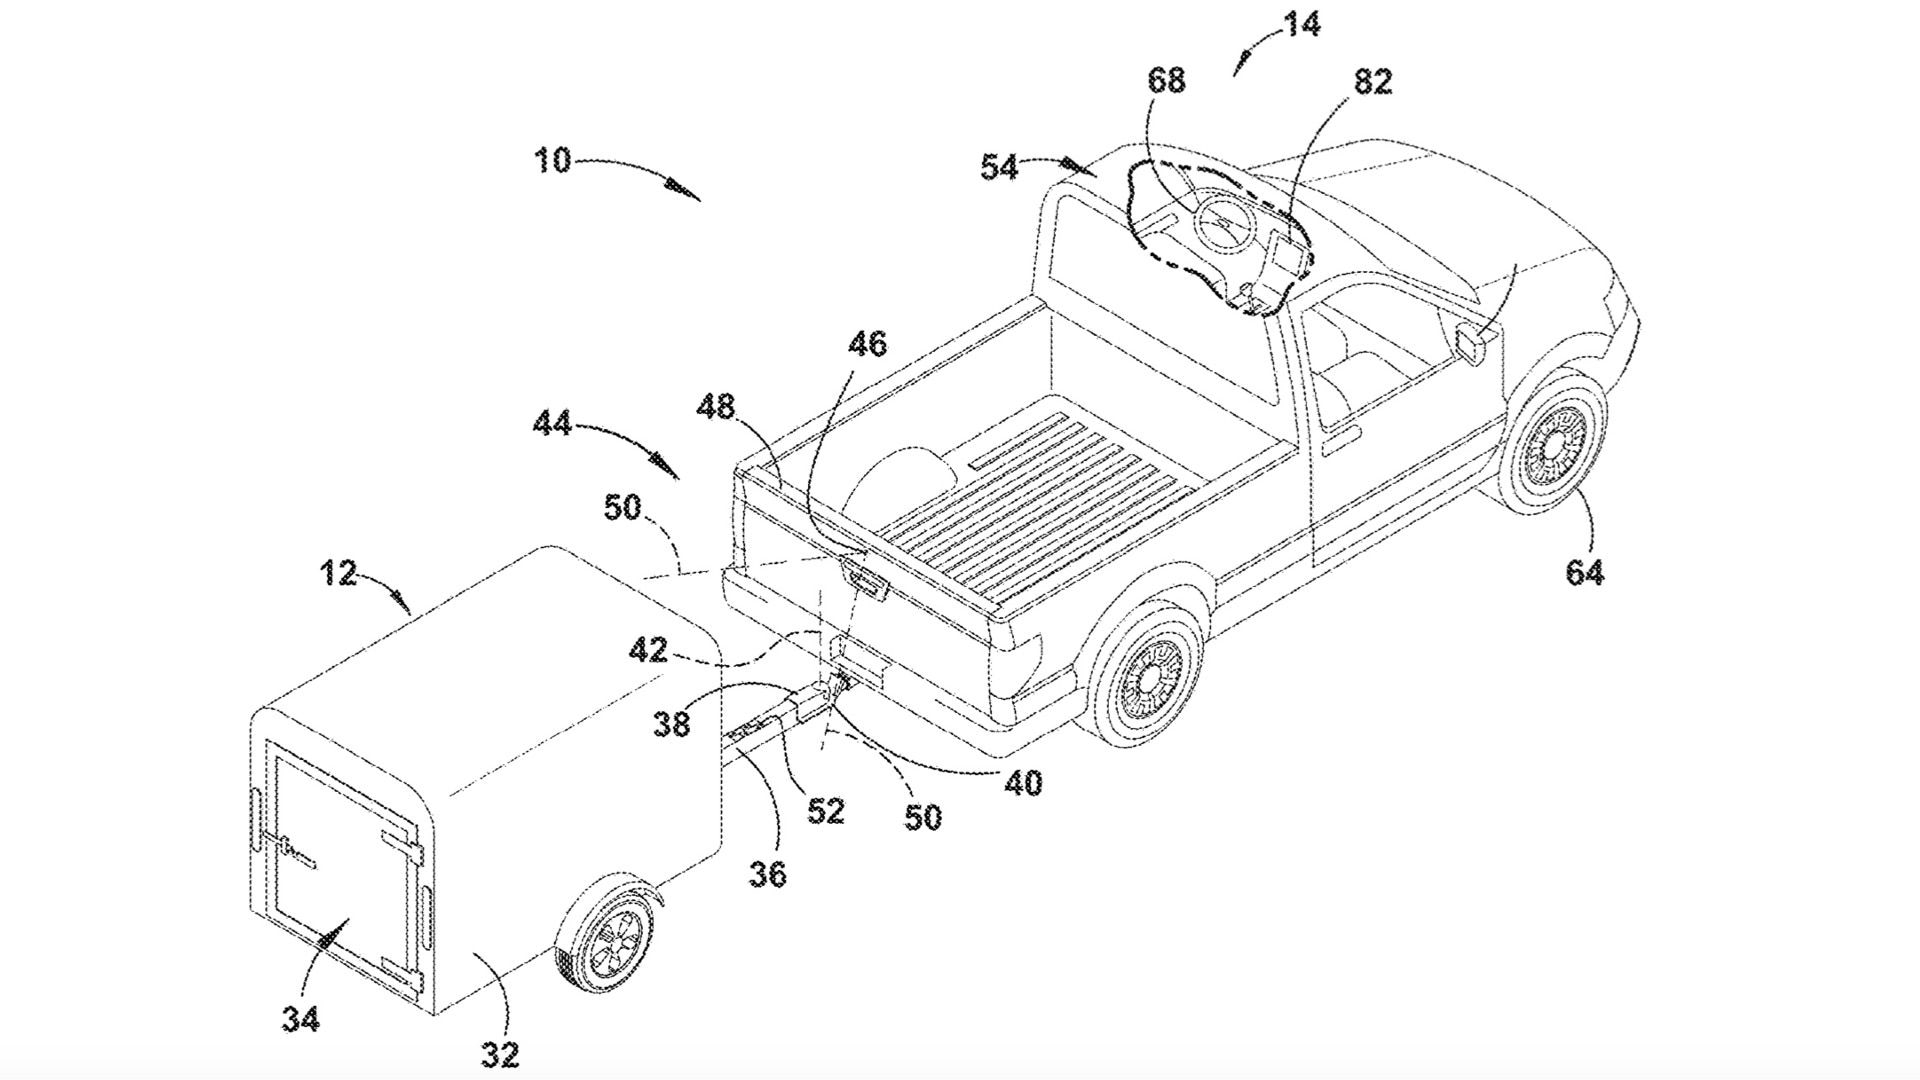 Ford trailer sideswipe avoidance system patent image